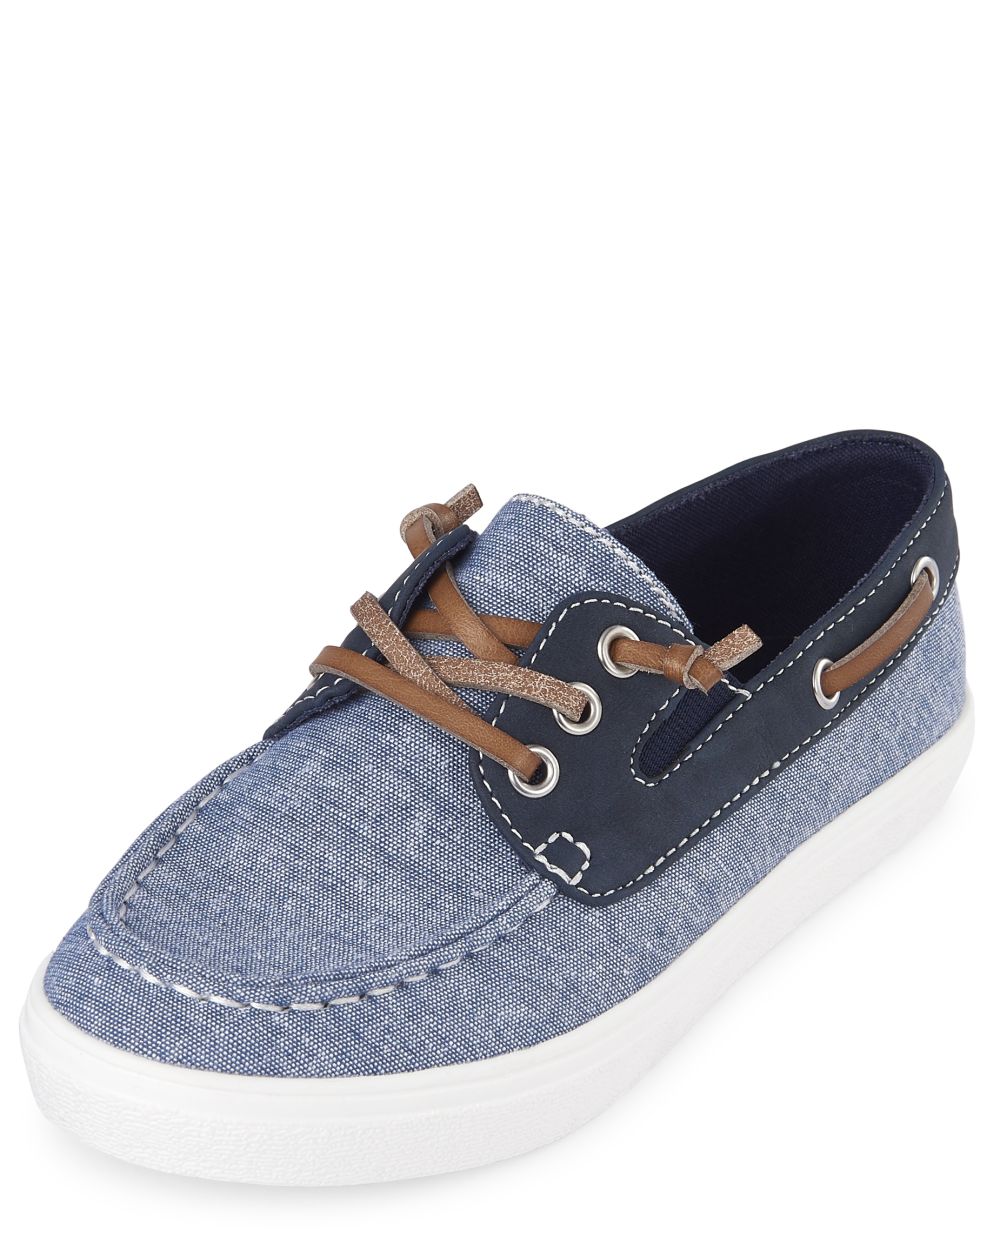 Boys Easter Chambray Matching Boat Shoes